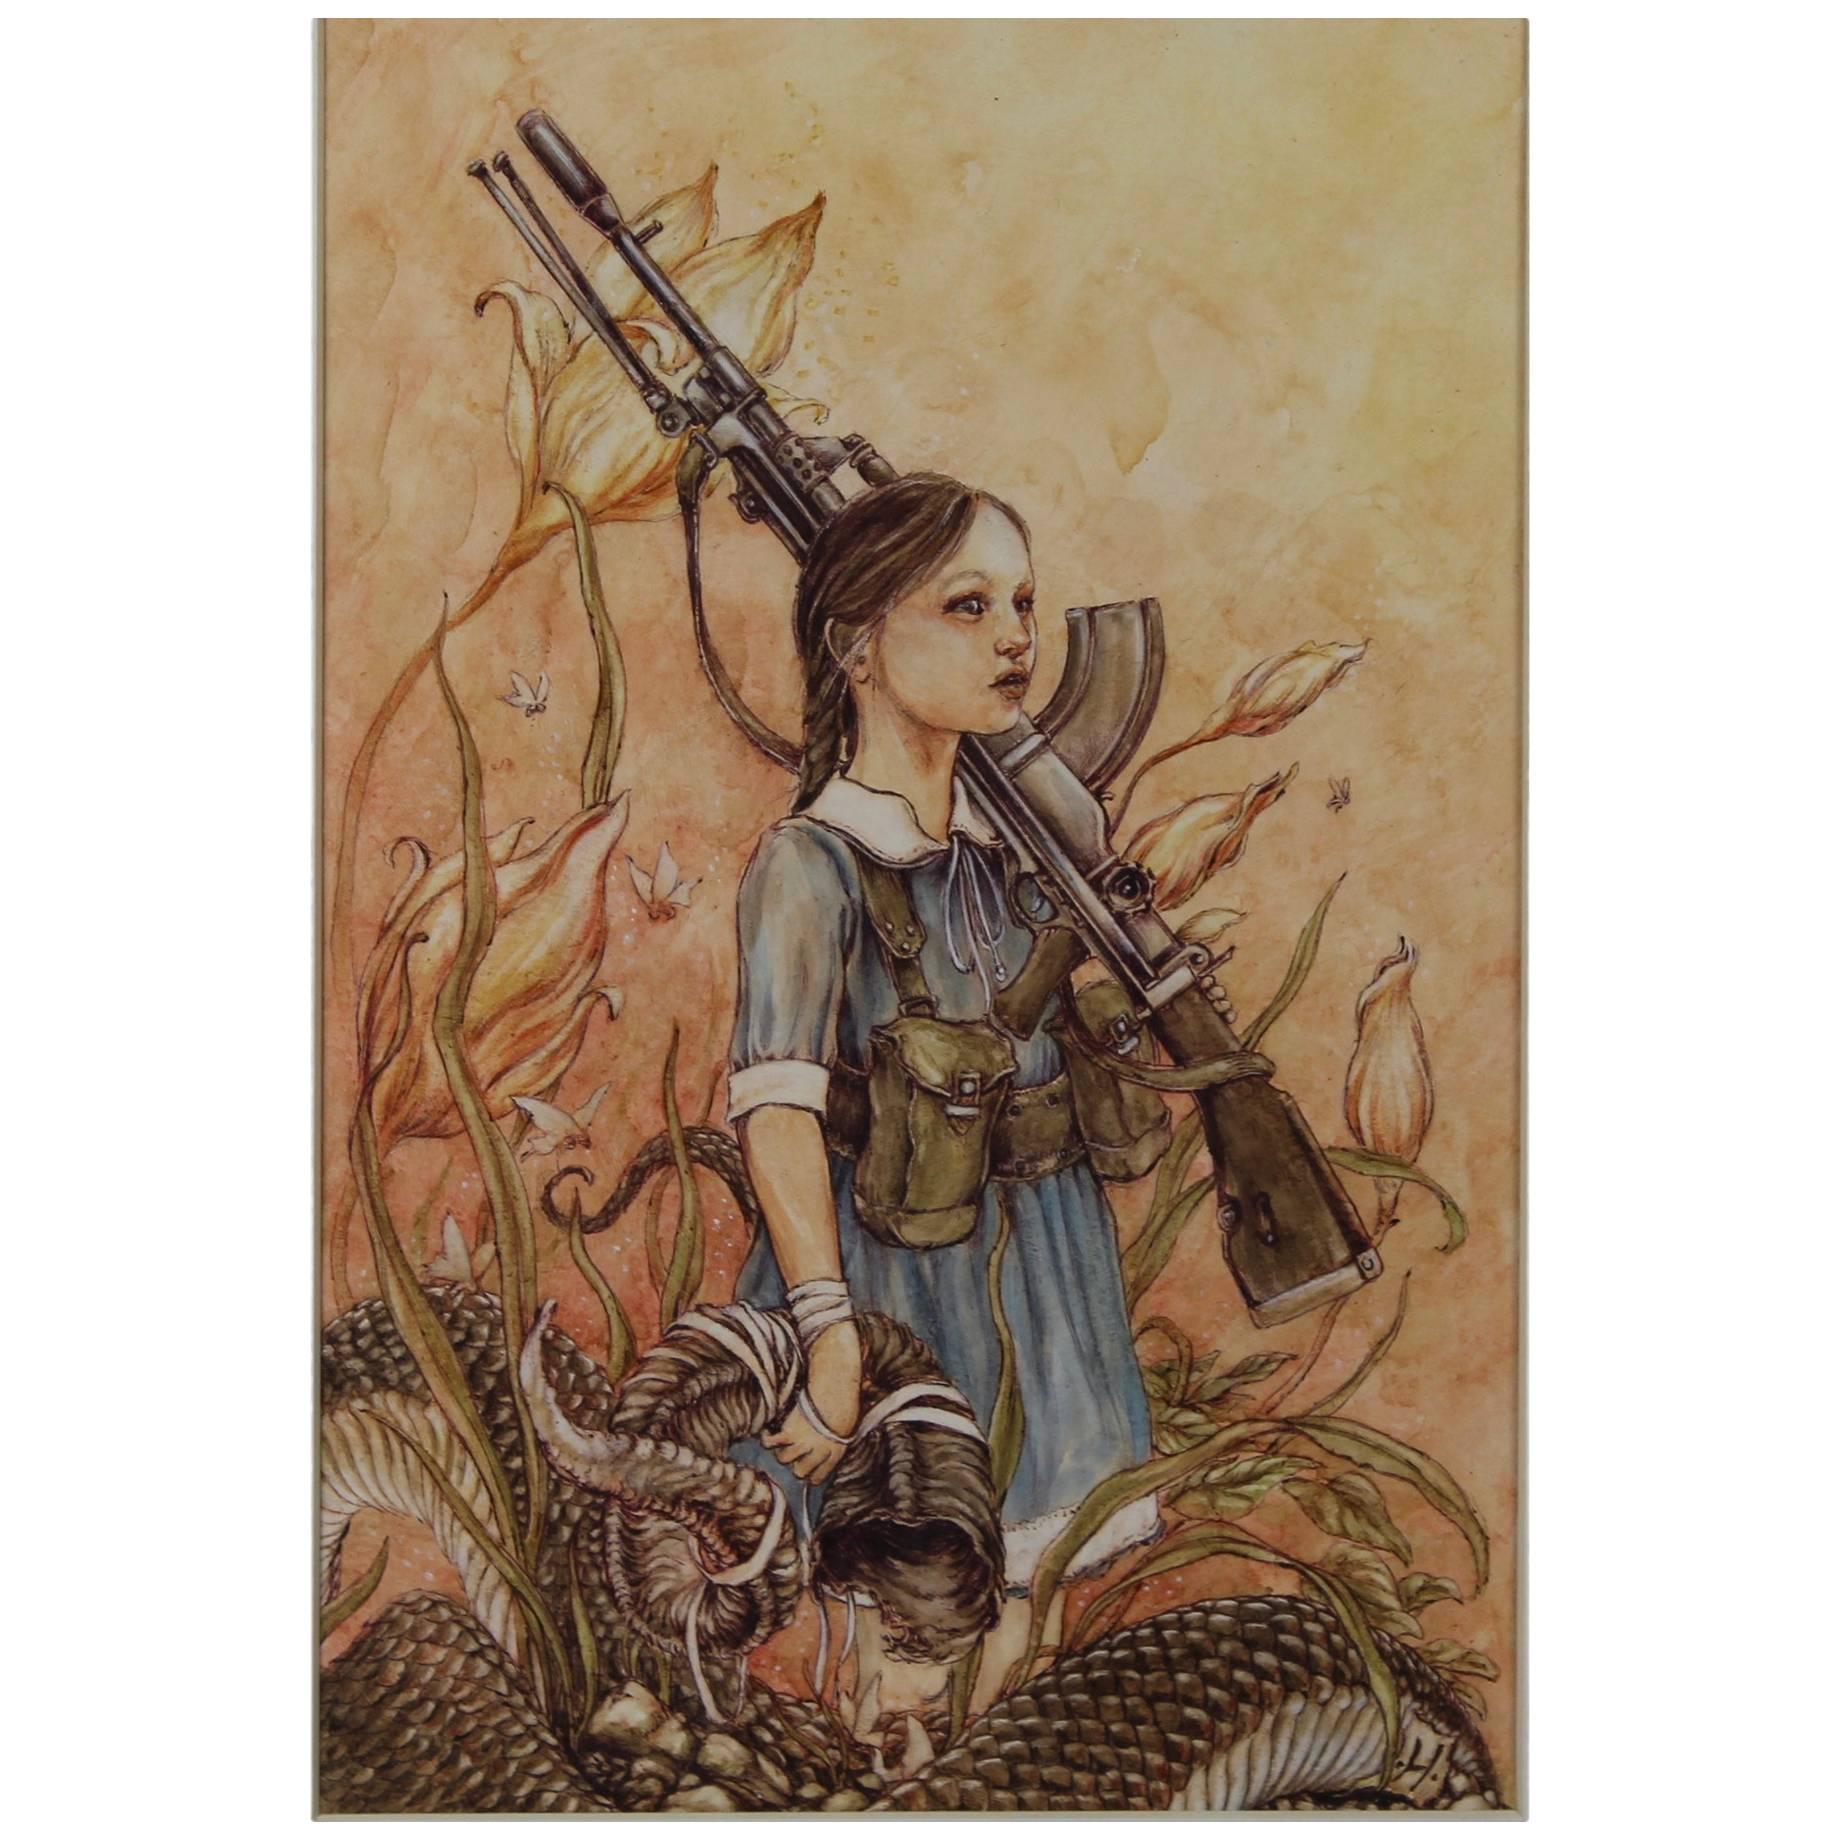 Front Line of the Glando-Angelinnian War 'Henry Darger Theme', Jeremy Hush, 2015